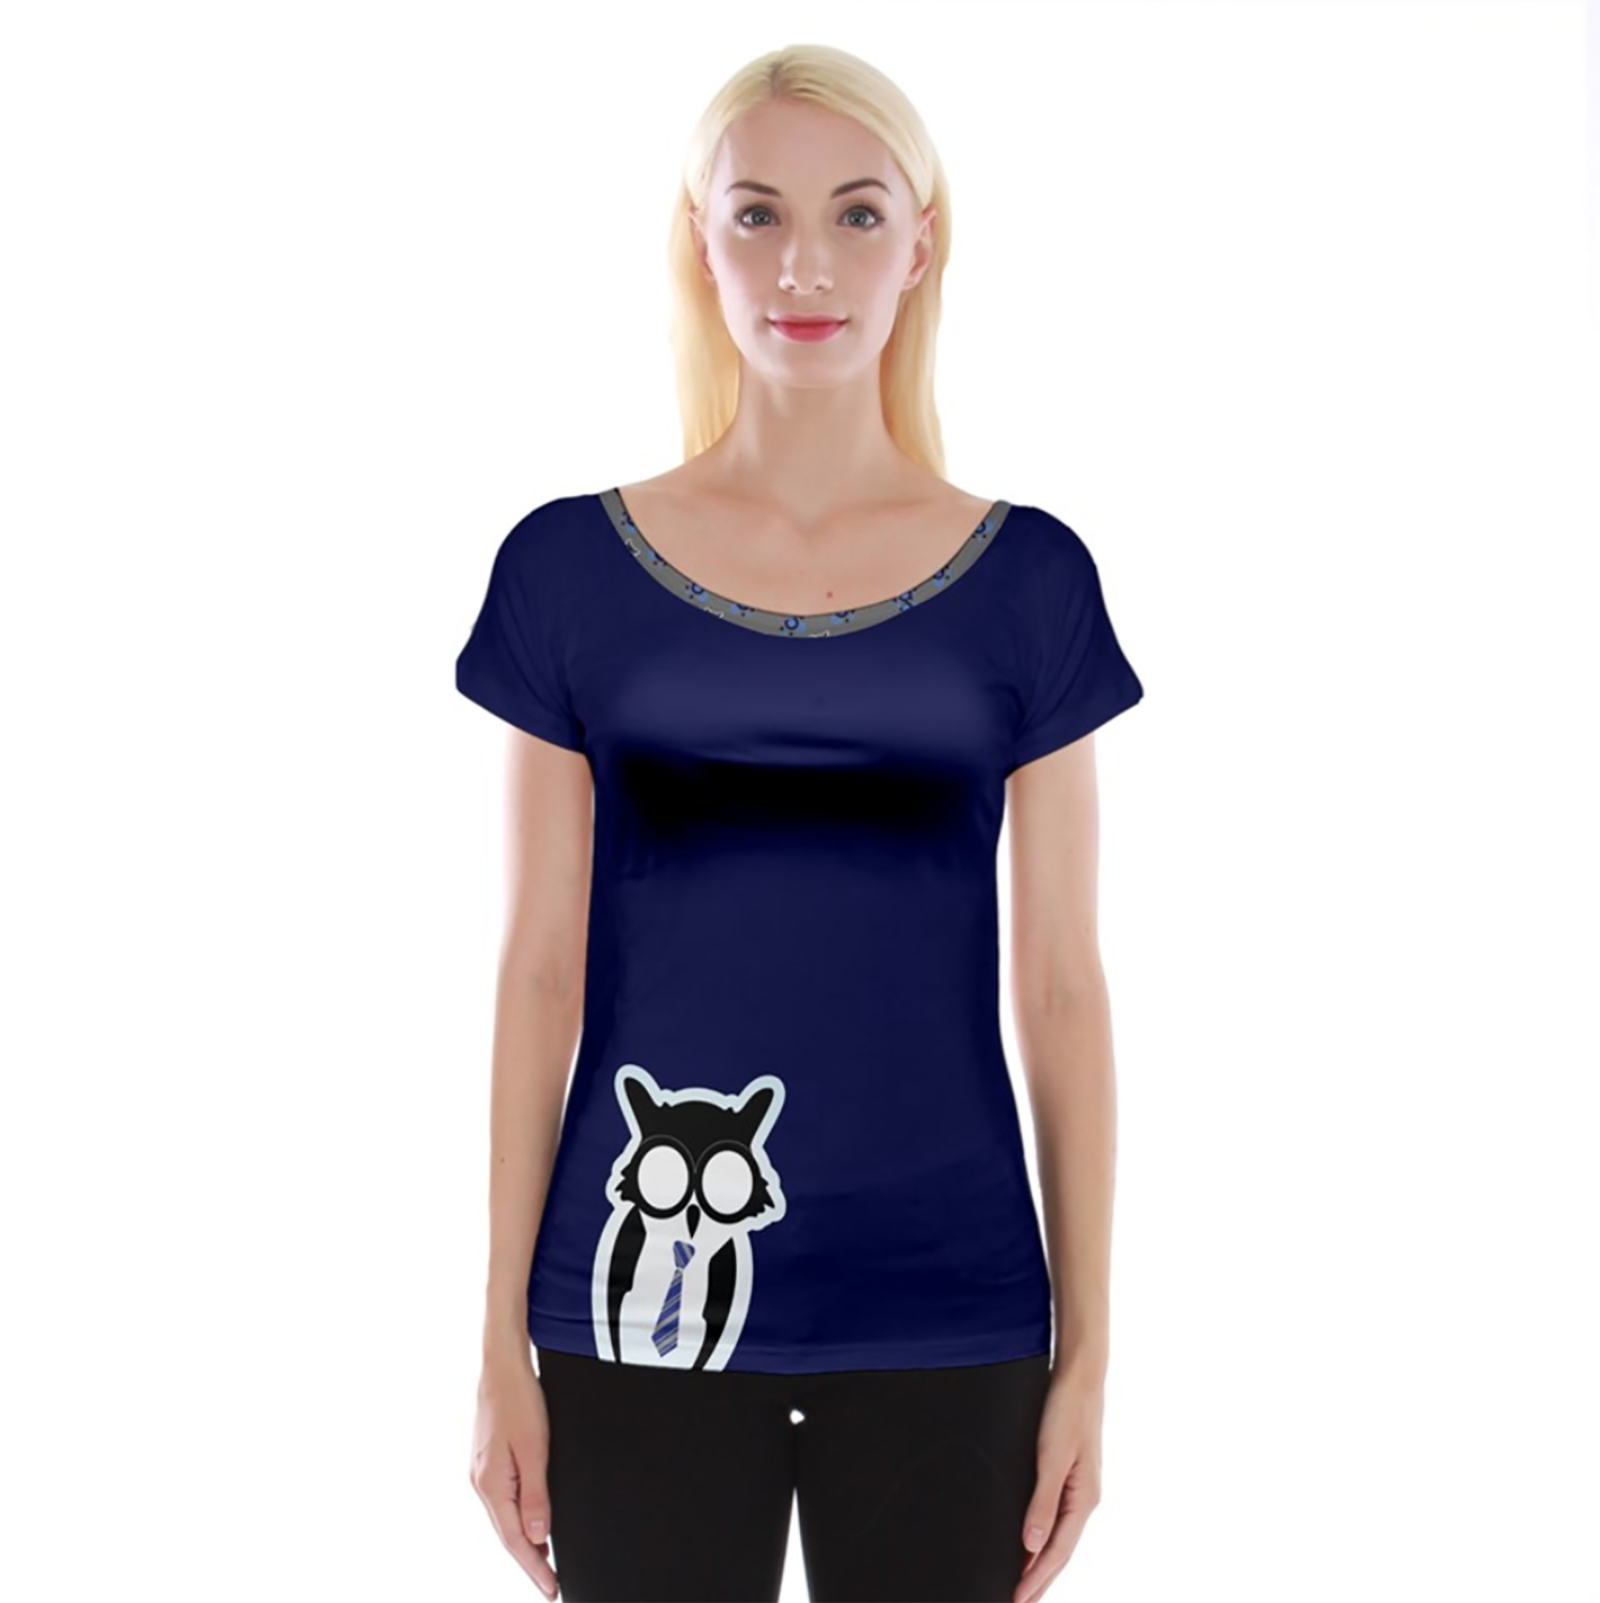 Blue/gray Owl Cap Sleeve Top - Inspired by Ravenclaw